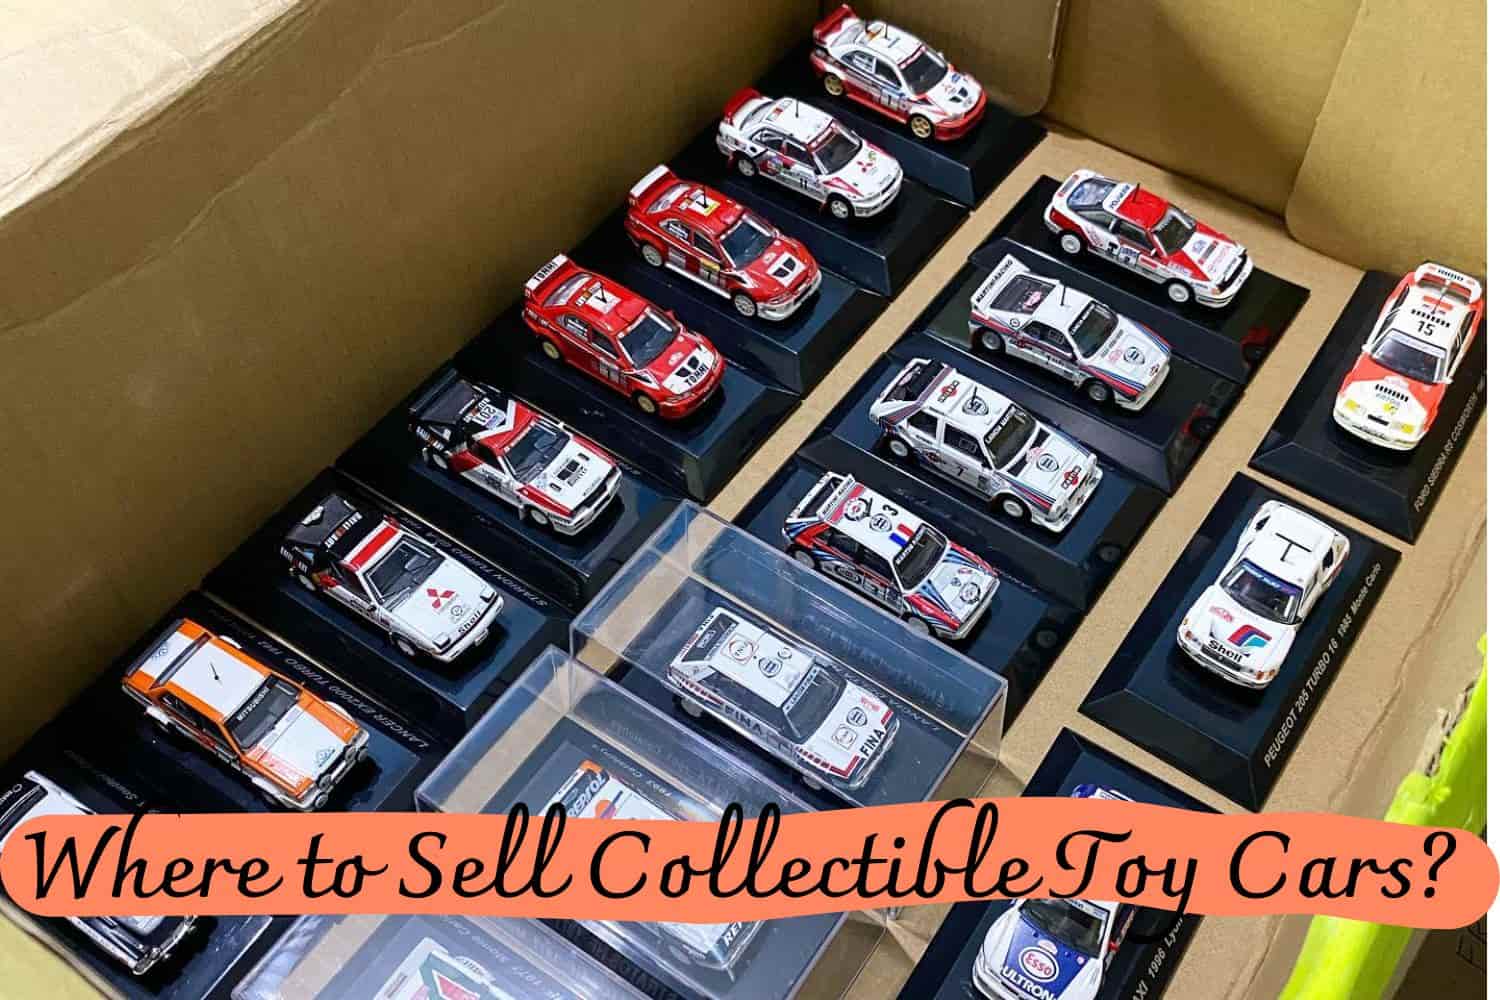 Where to Sell Collectible Toy Cars?